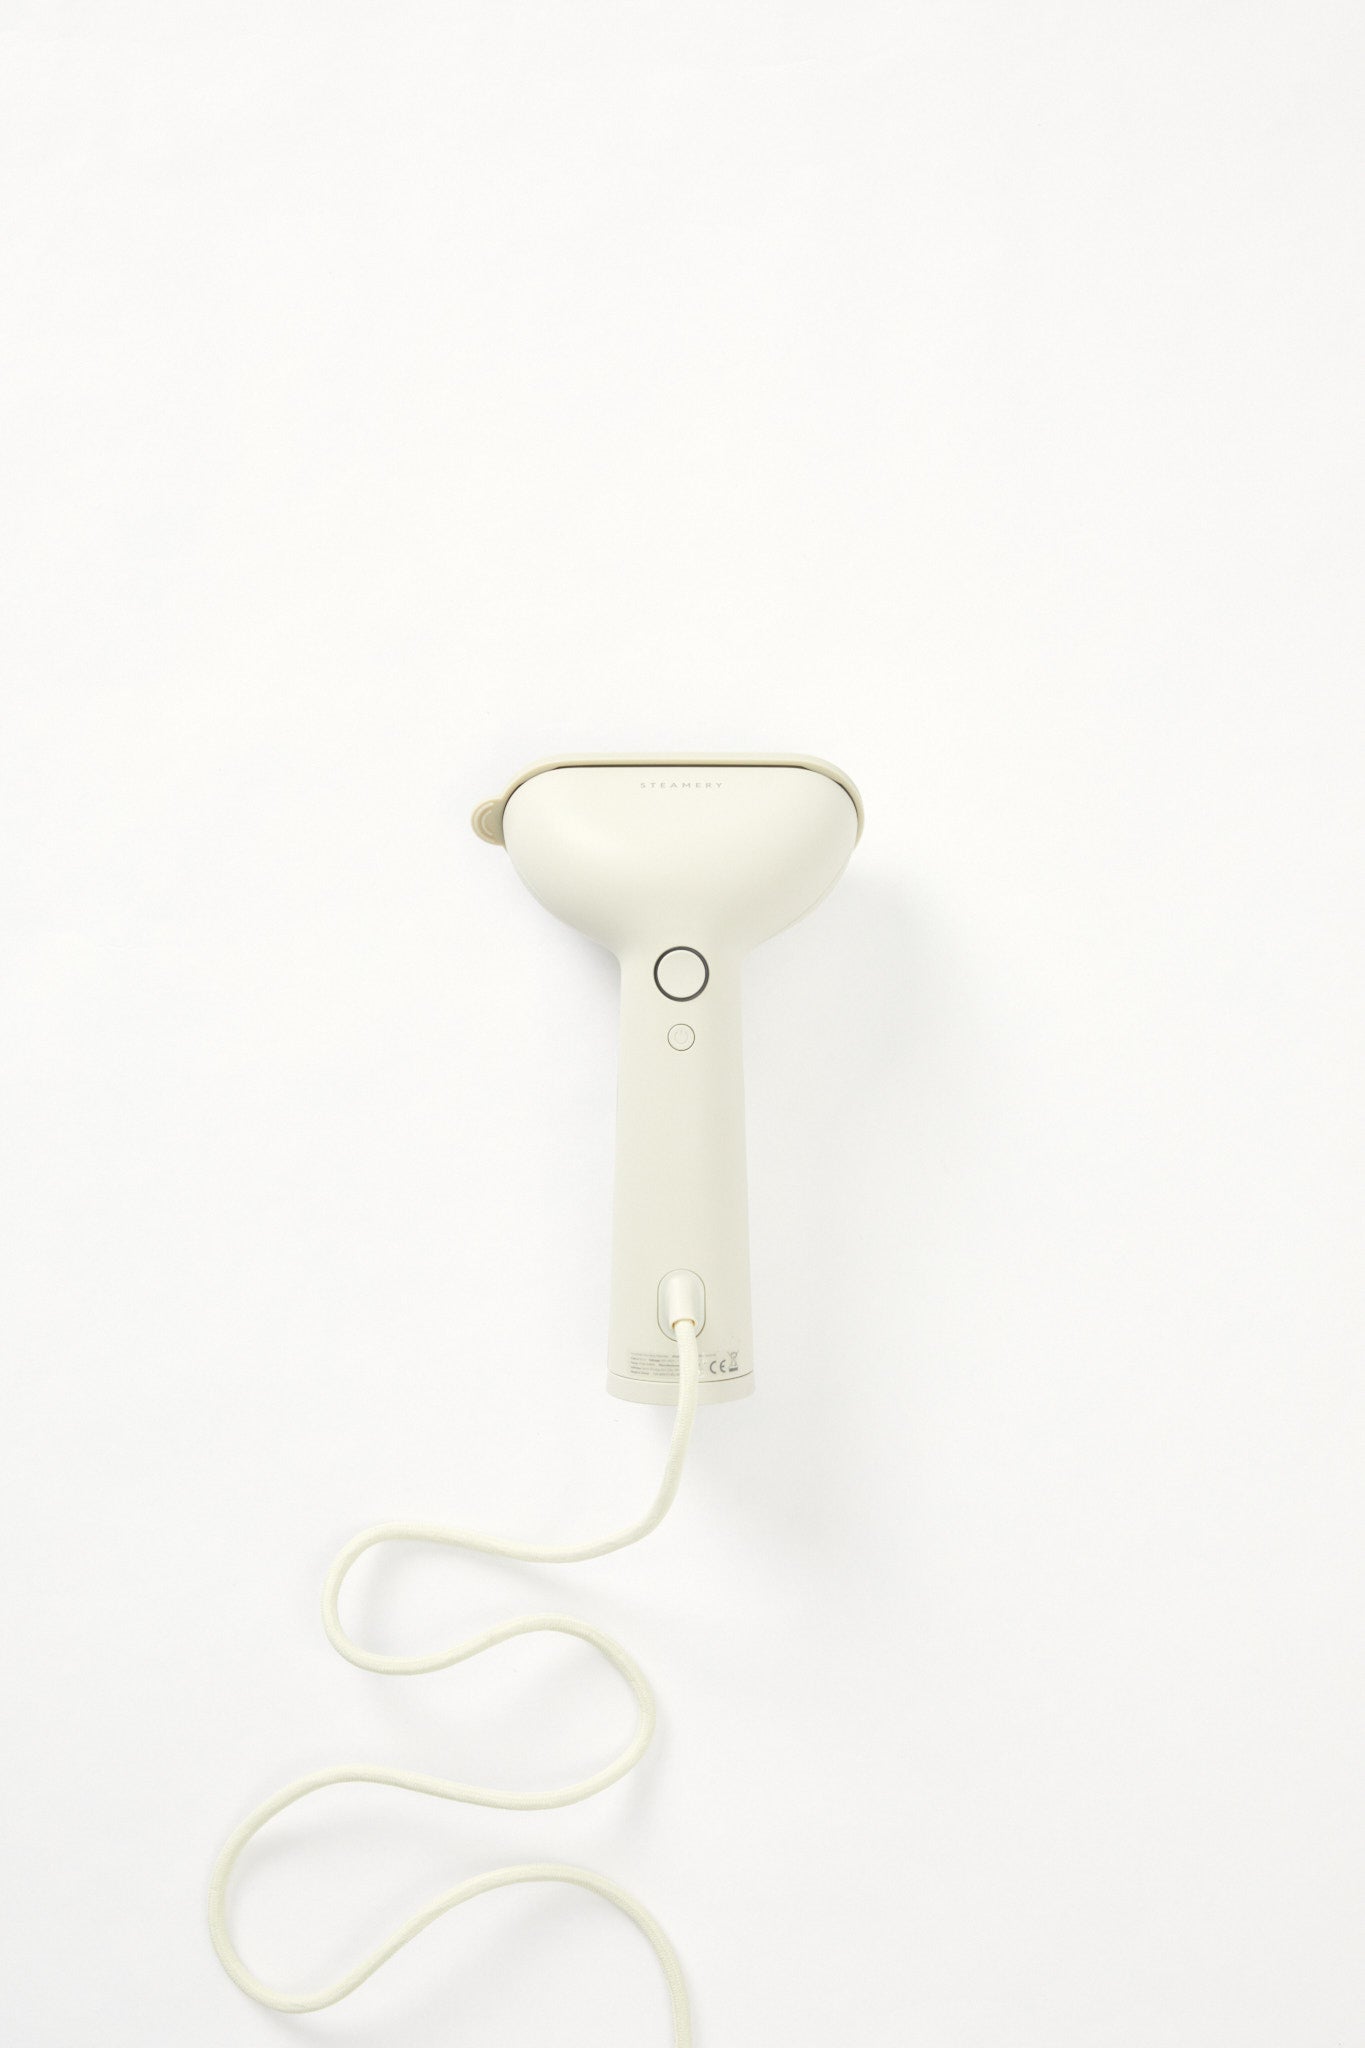 Mint green coloured clothes steamer by Steamery Stockholm. A